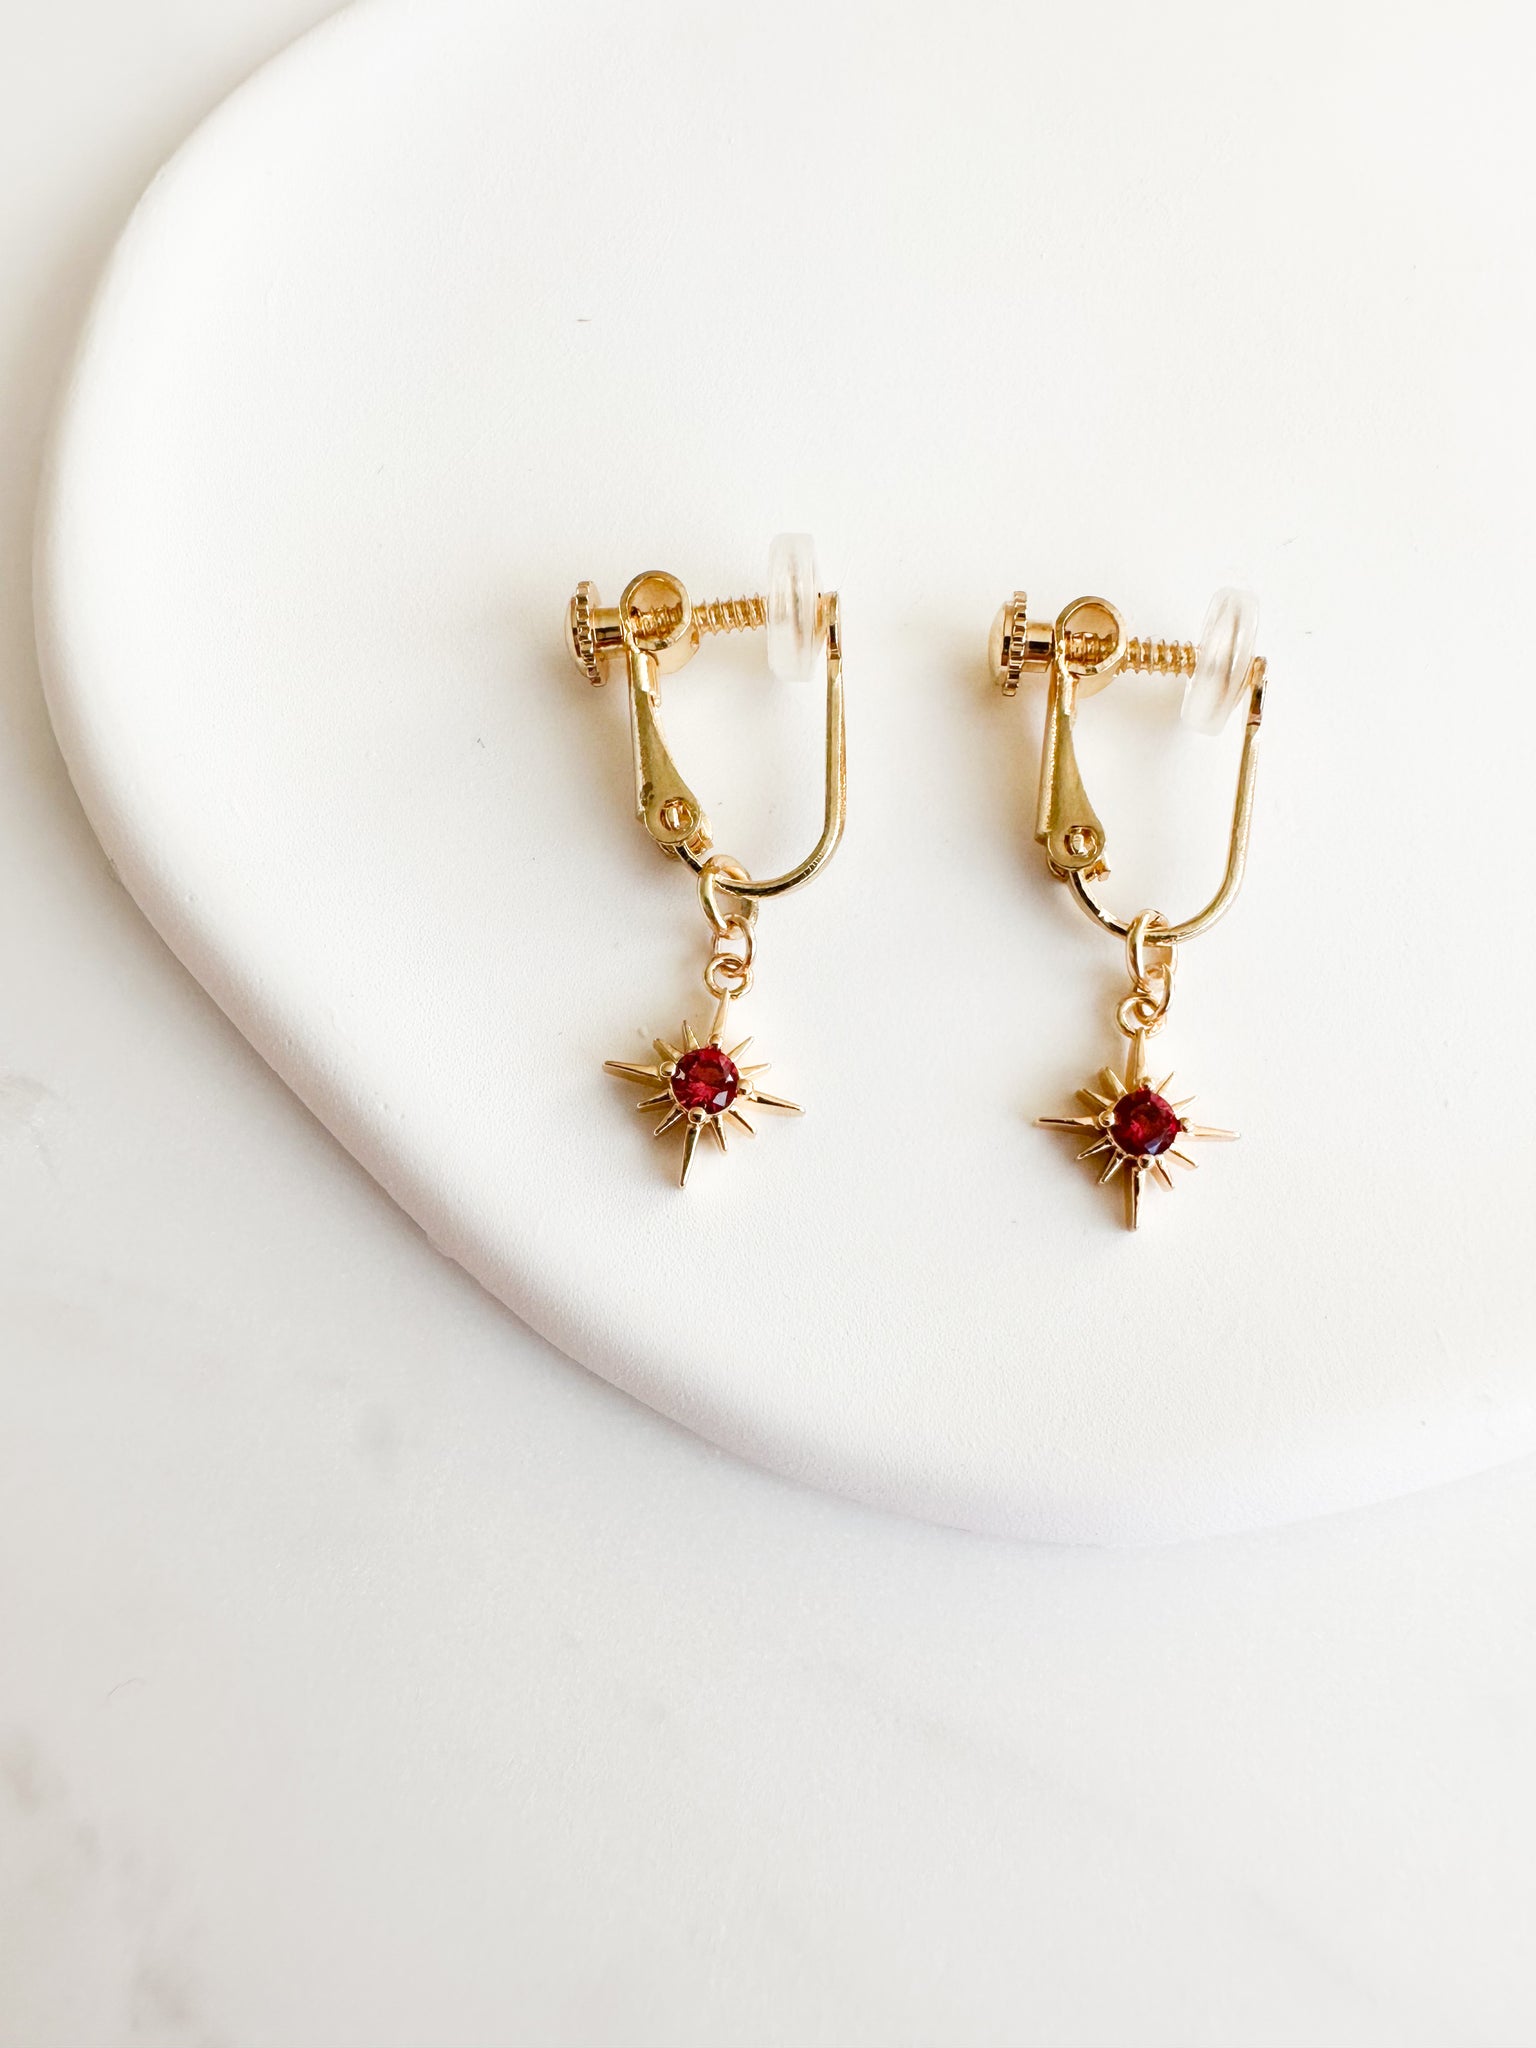 gold constellation charm with a ruby red gem in the middle. screwback clipon earrings